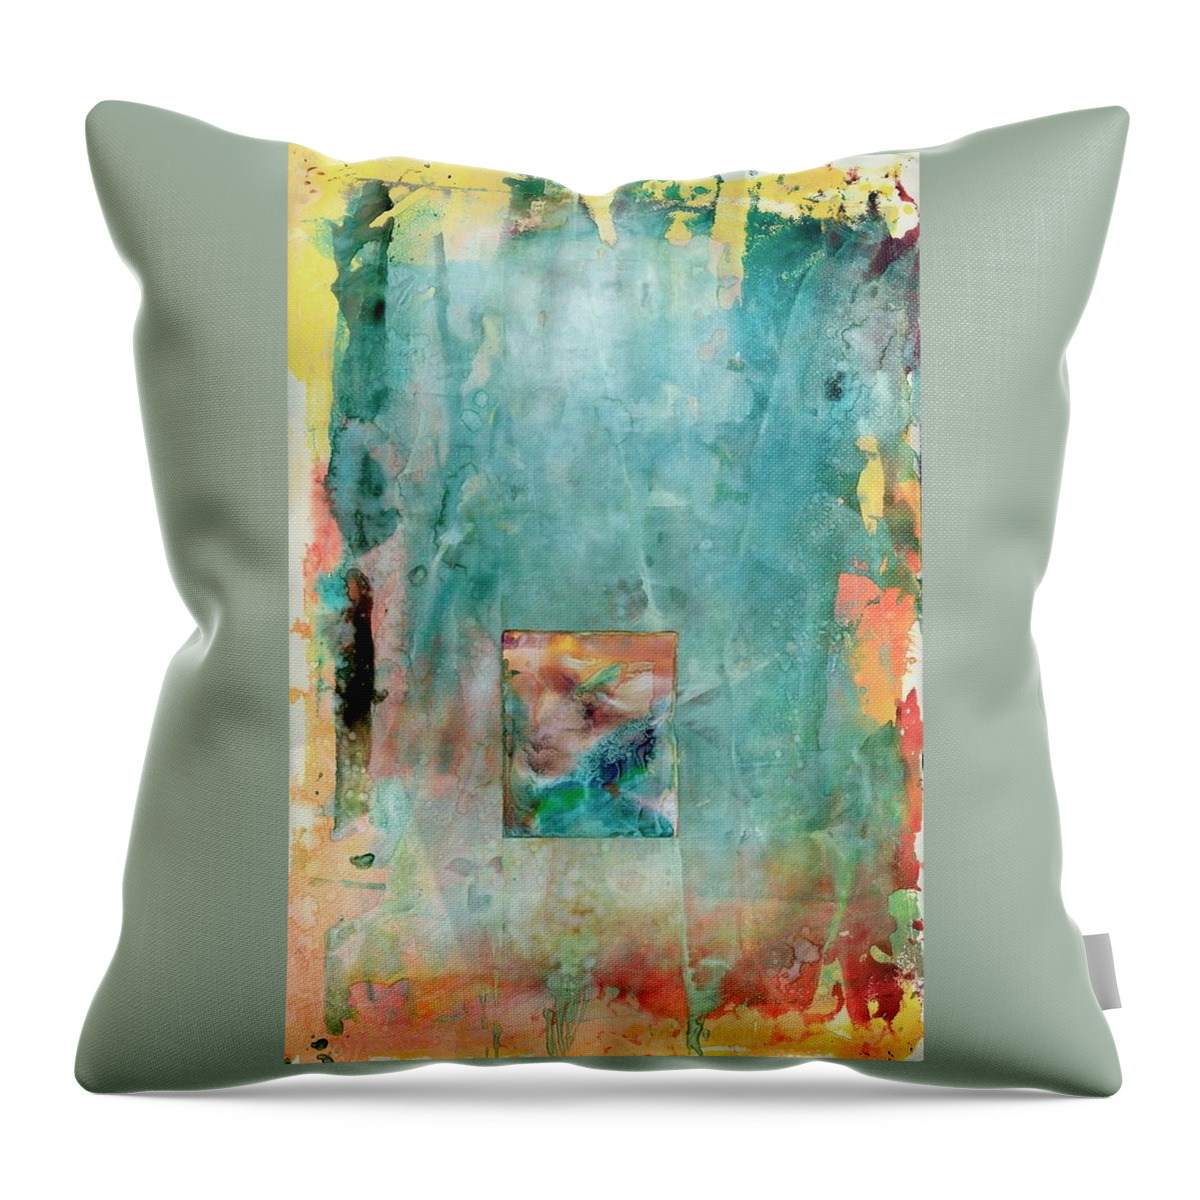  Throw Pillow featuring the painting Forward Motion by Sperry Andrews